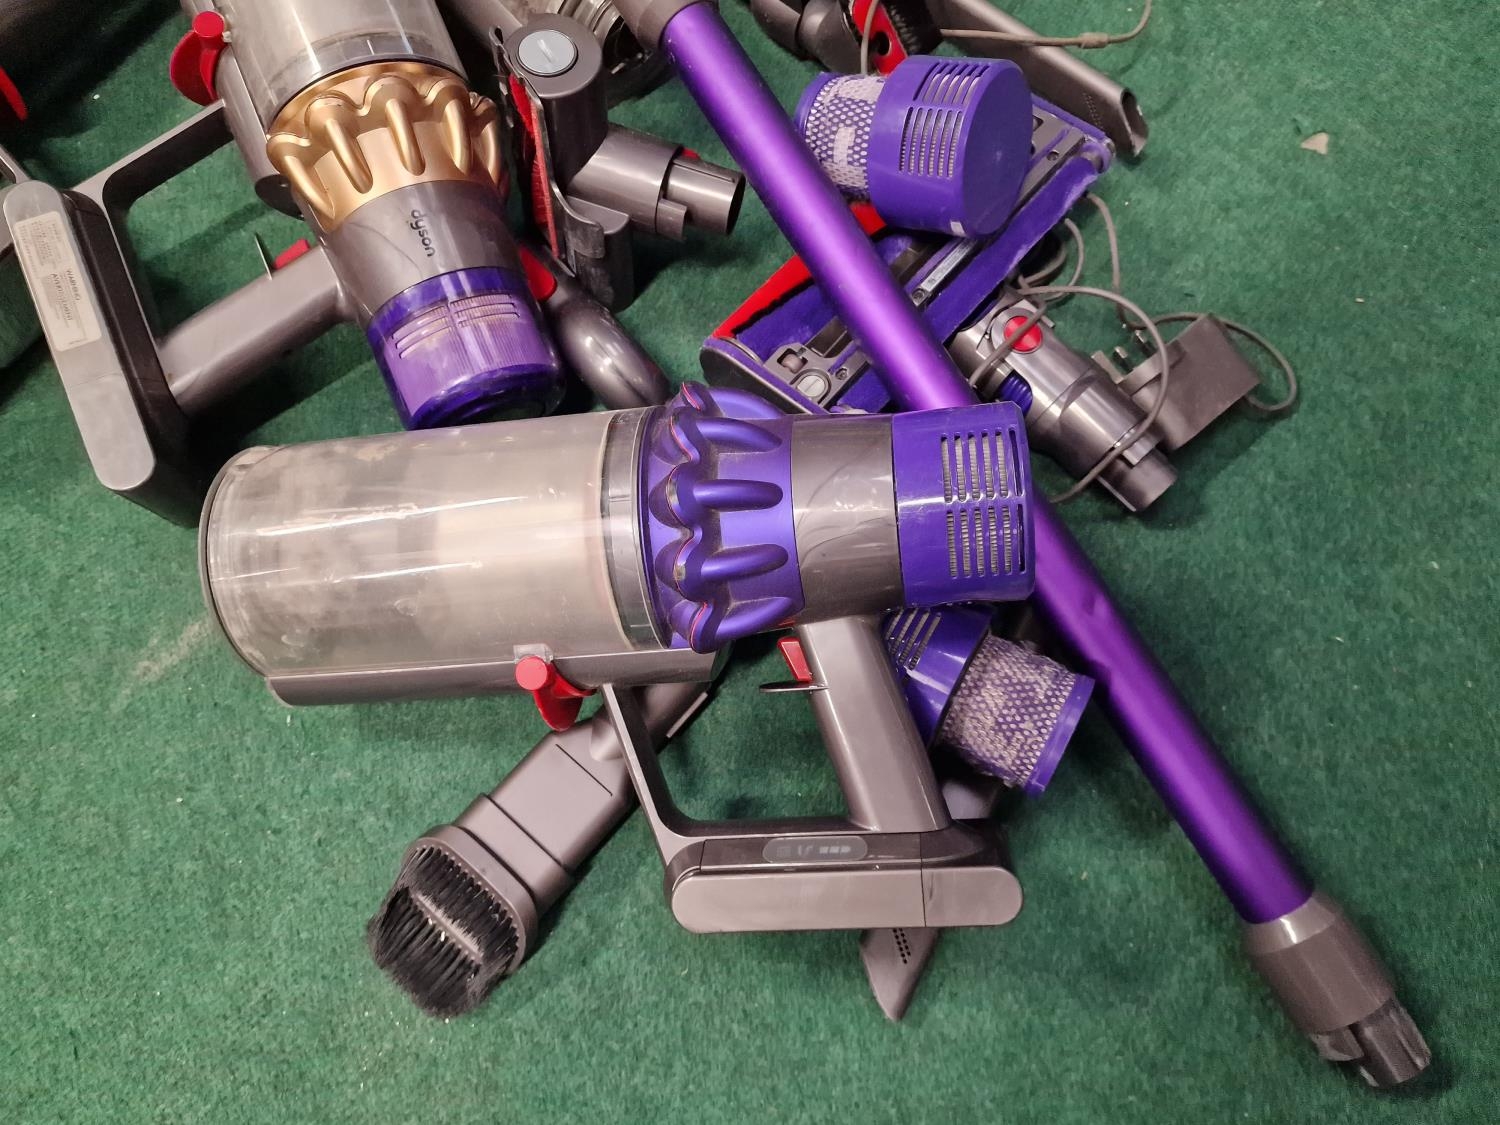 Collection of Dyson cordless vacuum cleaner spares. - Image 3 of 3